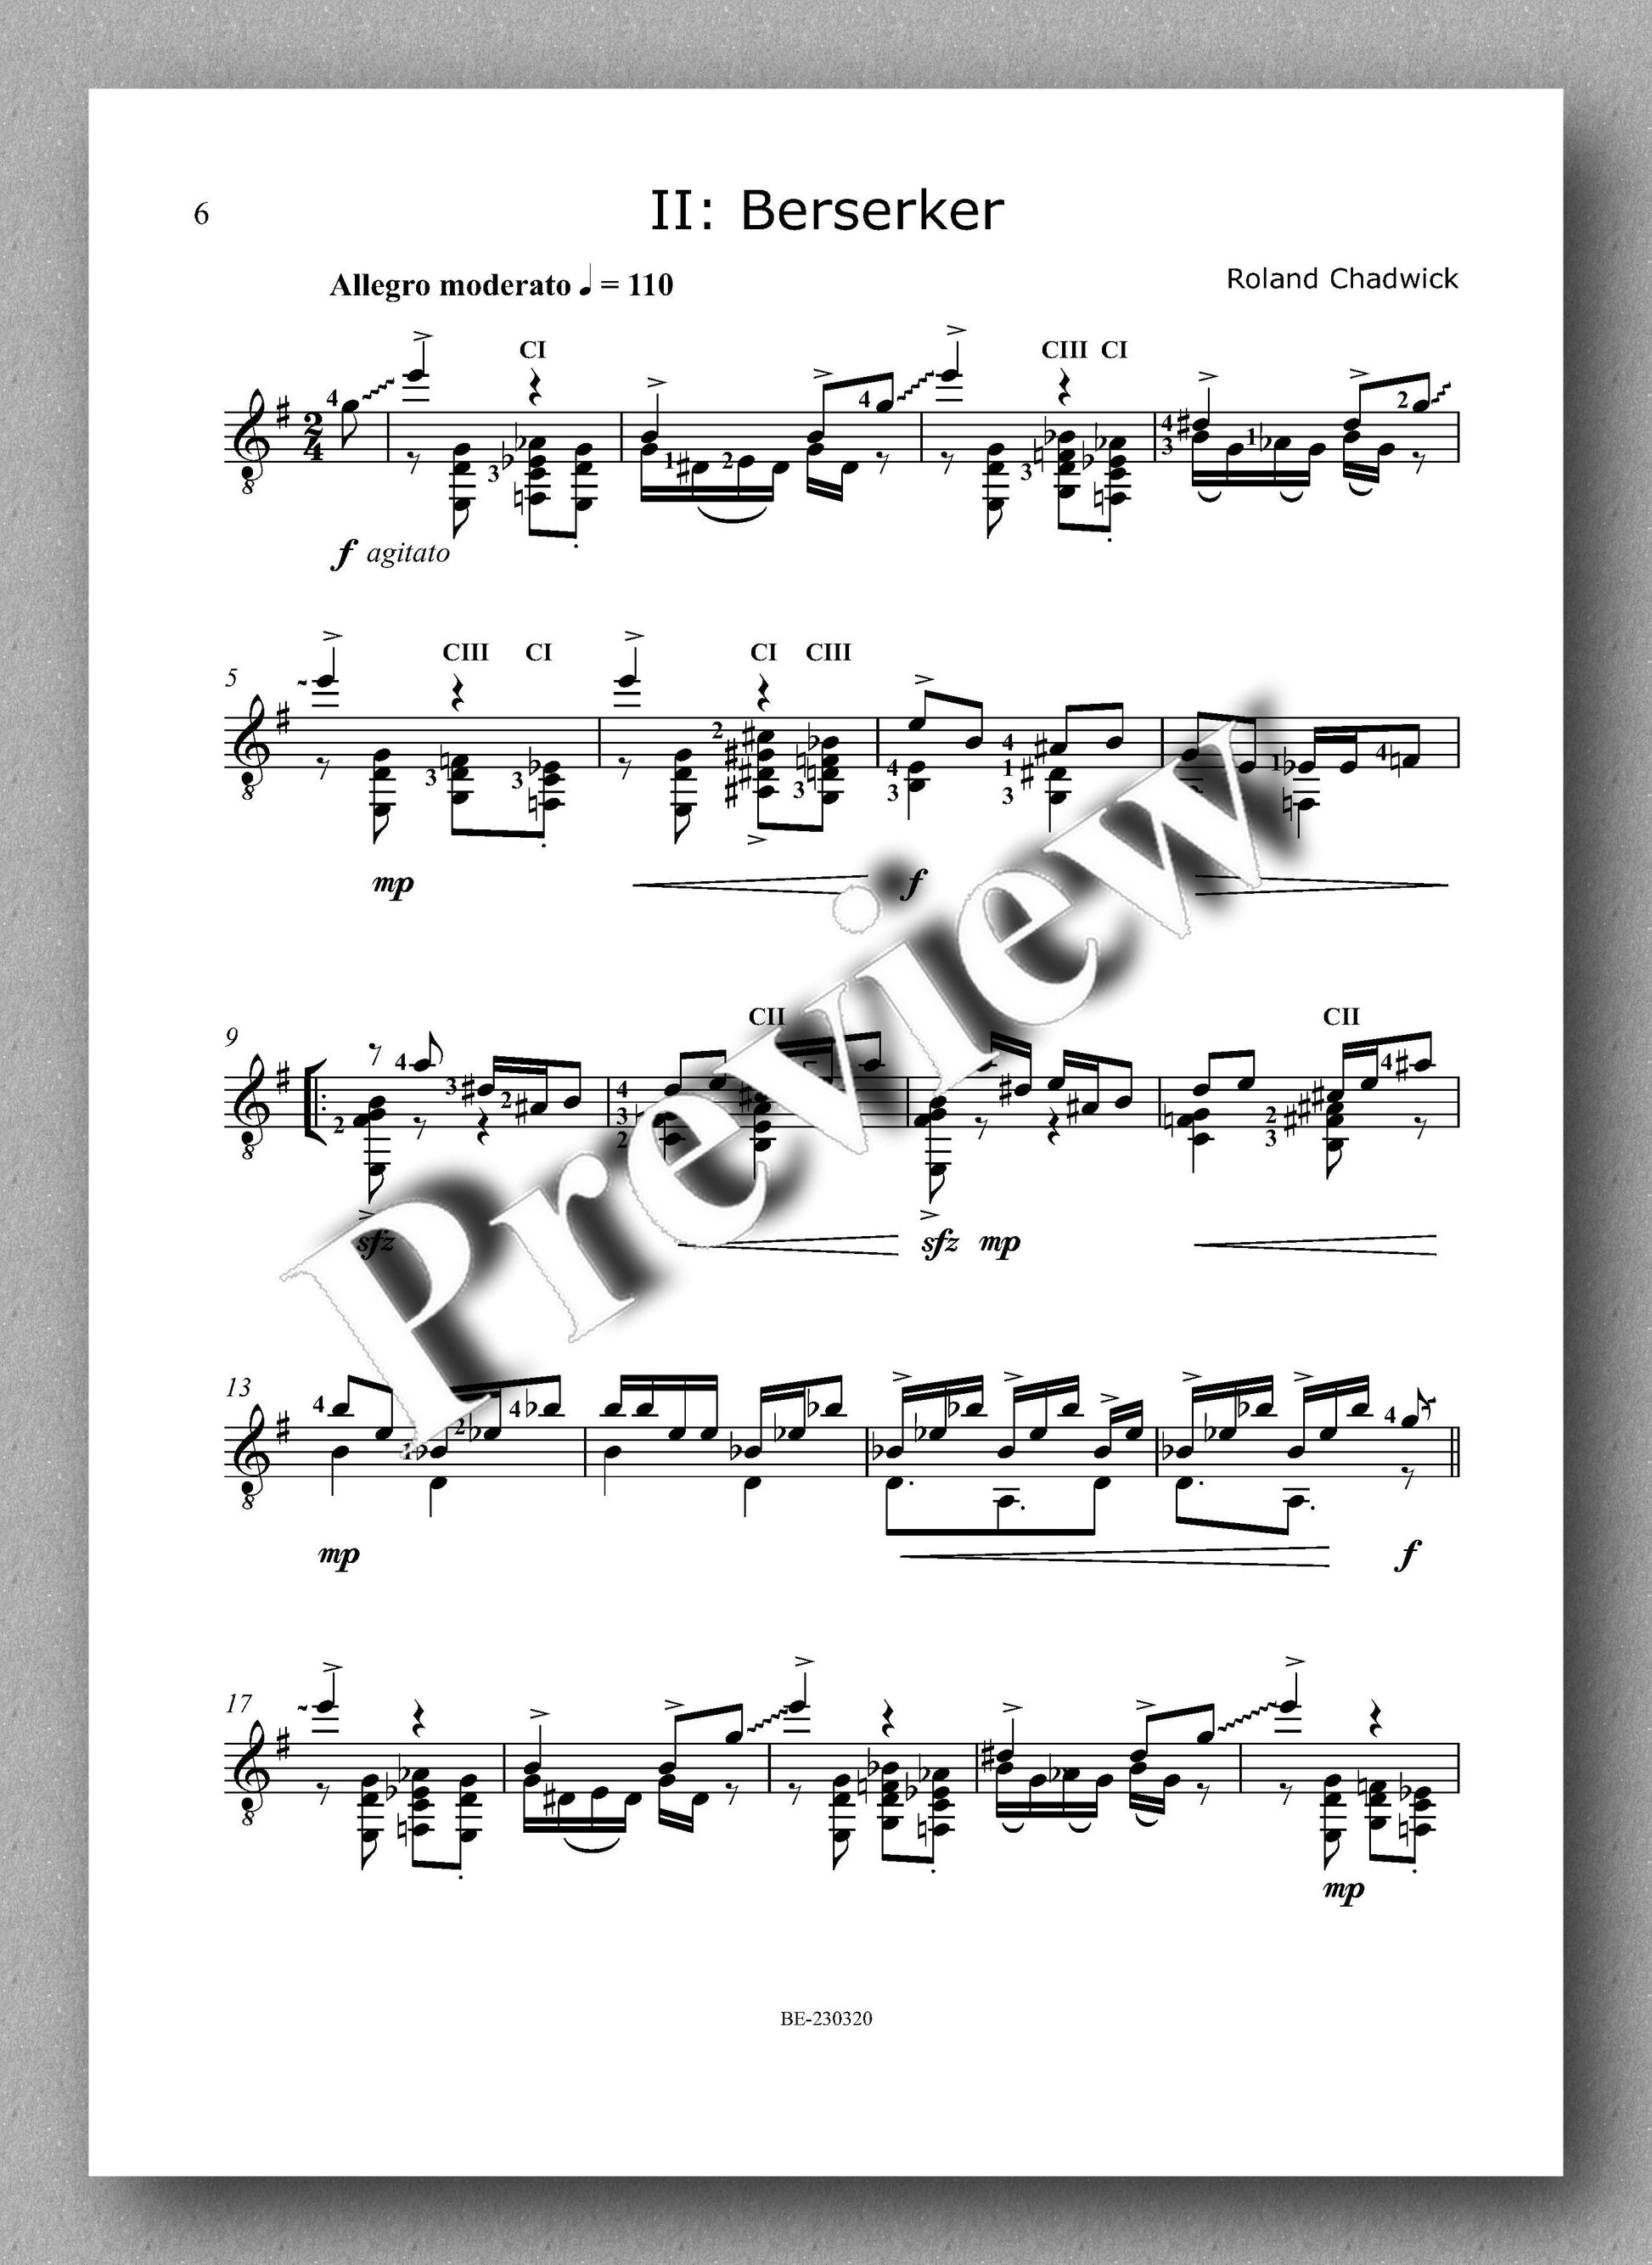 Roland Chadwick - The Soldier - preview of the music score 2